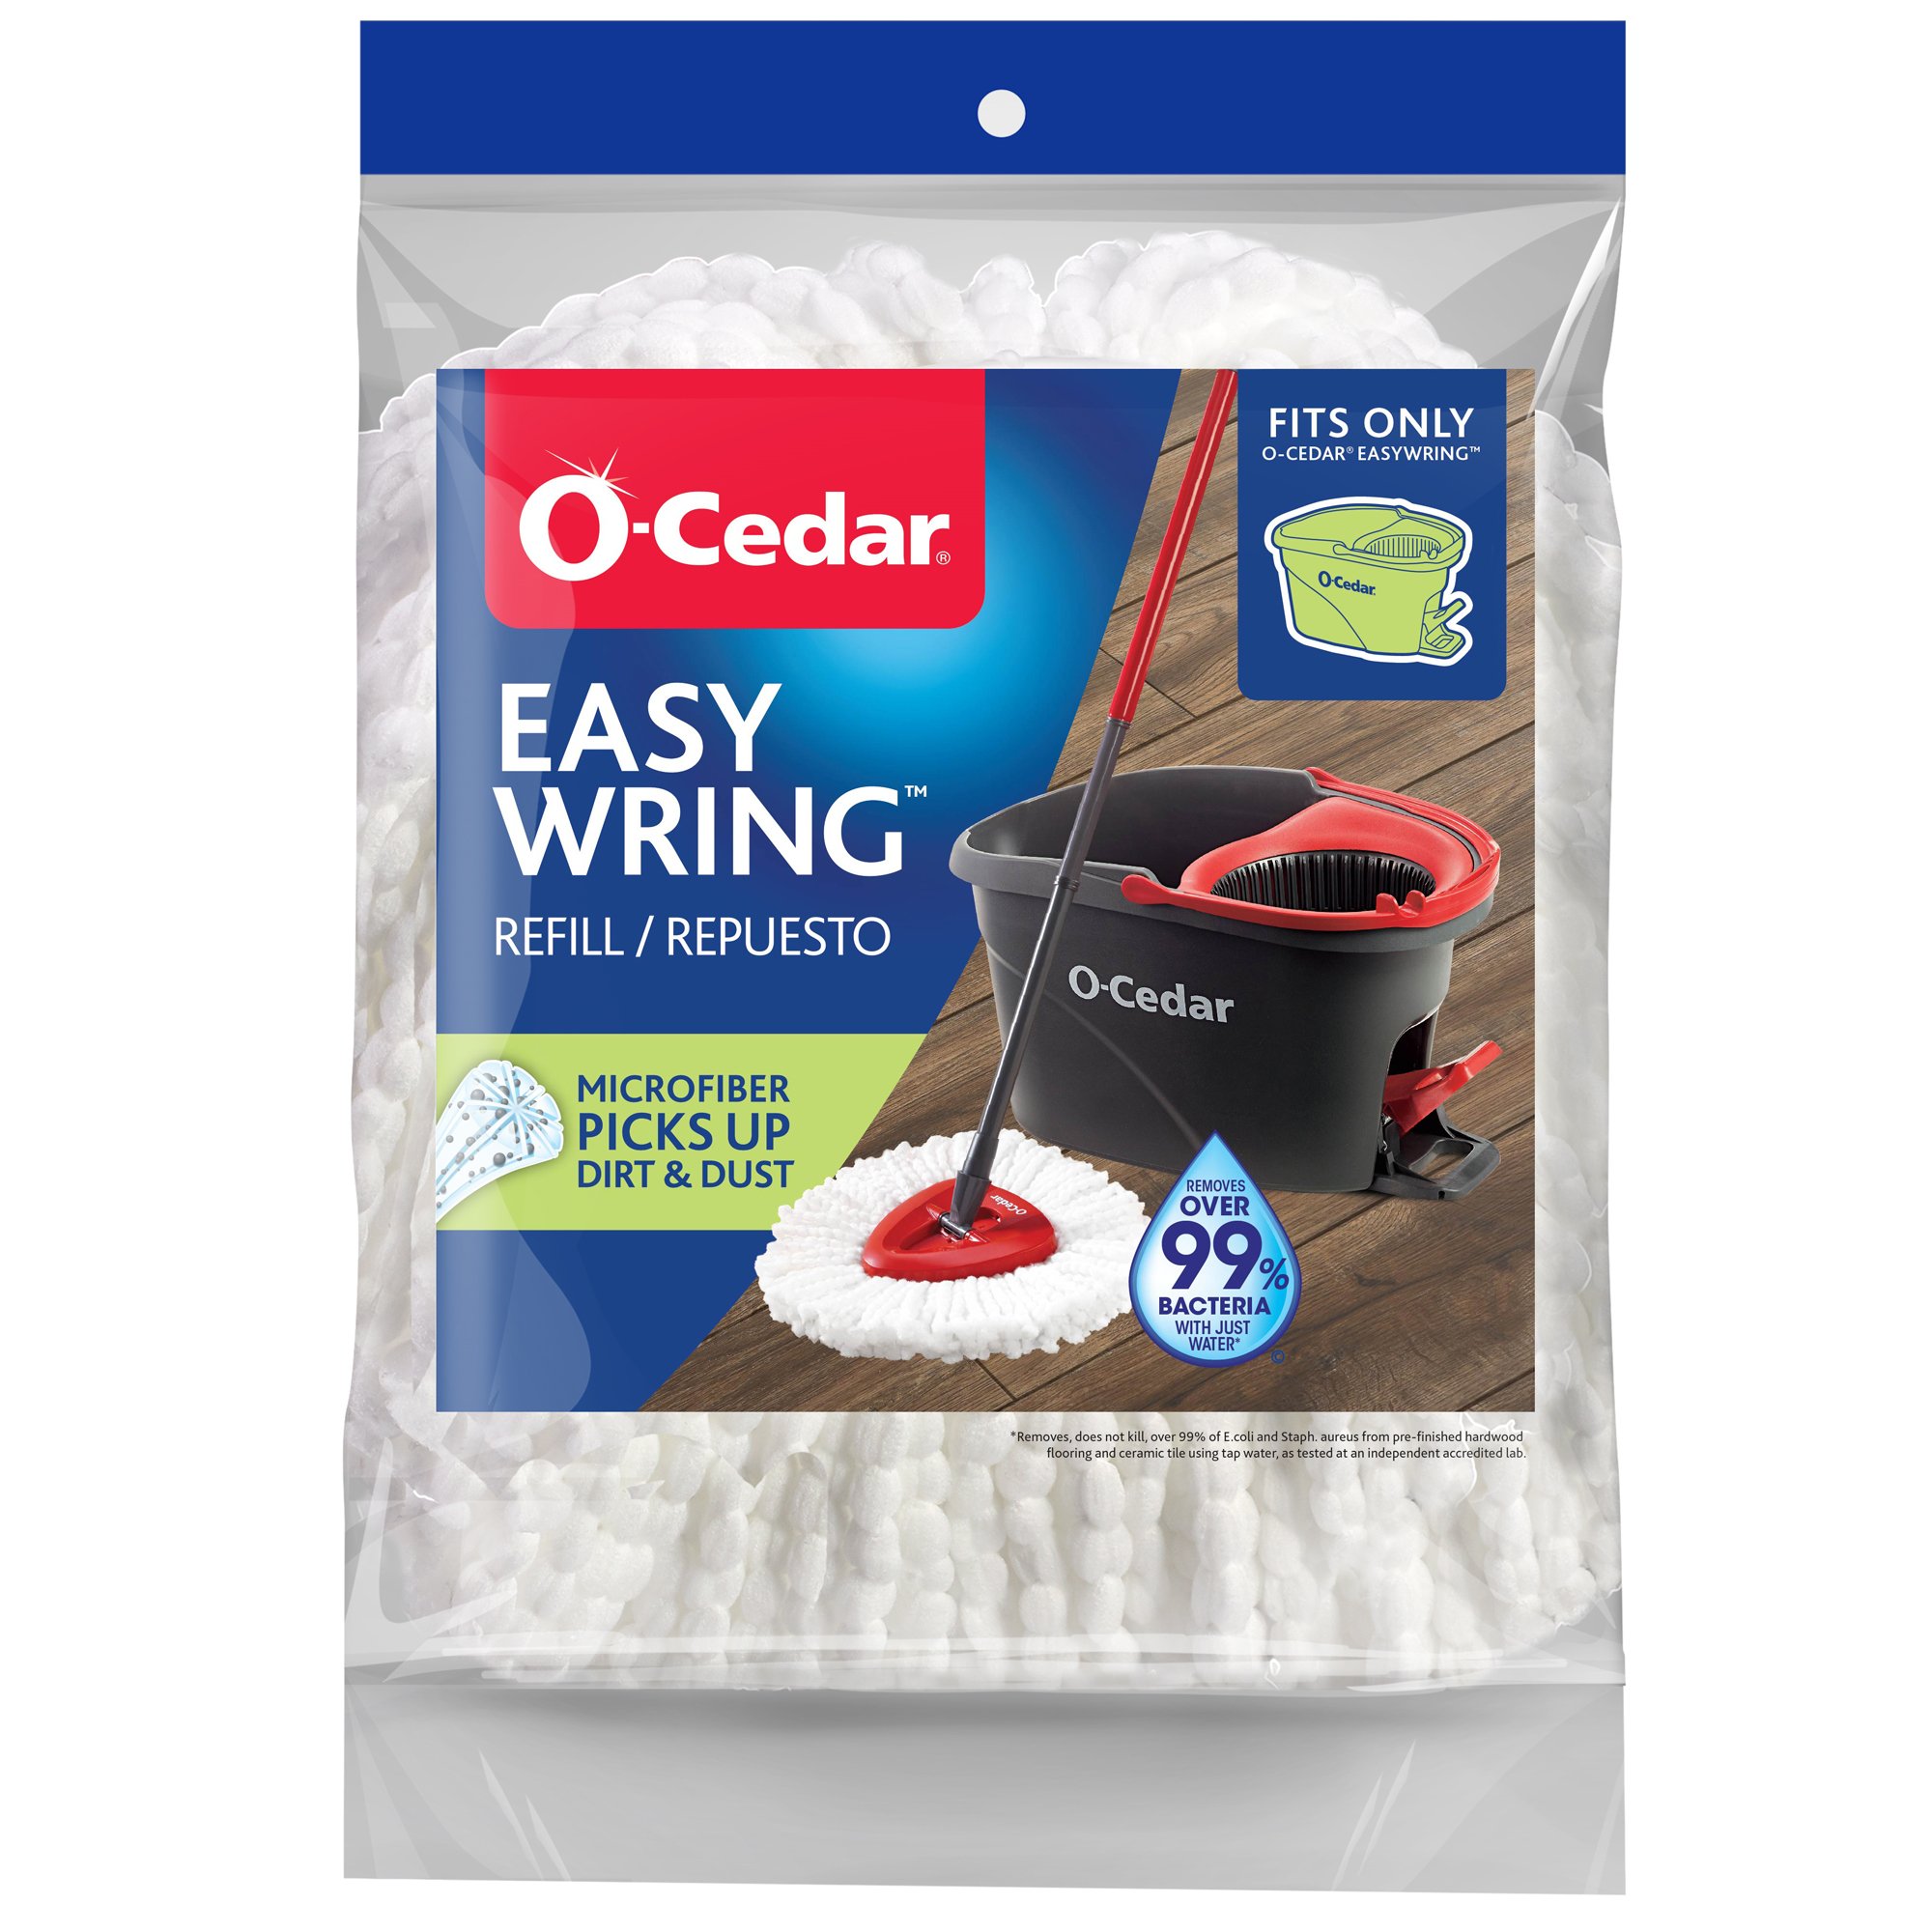 o-cedar-easywring-spin-mop-refill-replacement-mop-heads-mop-parts